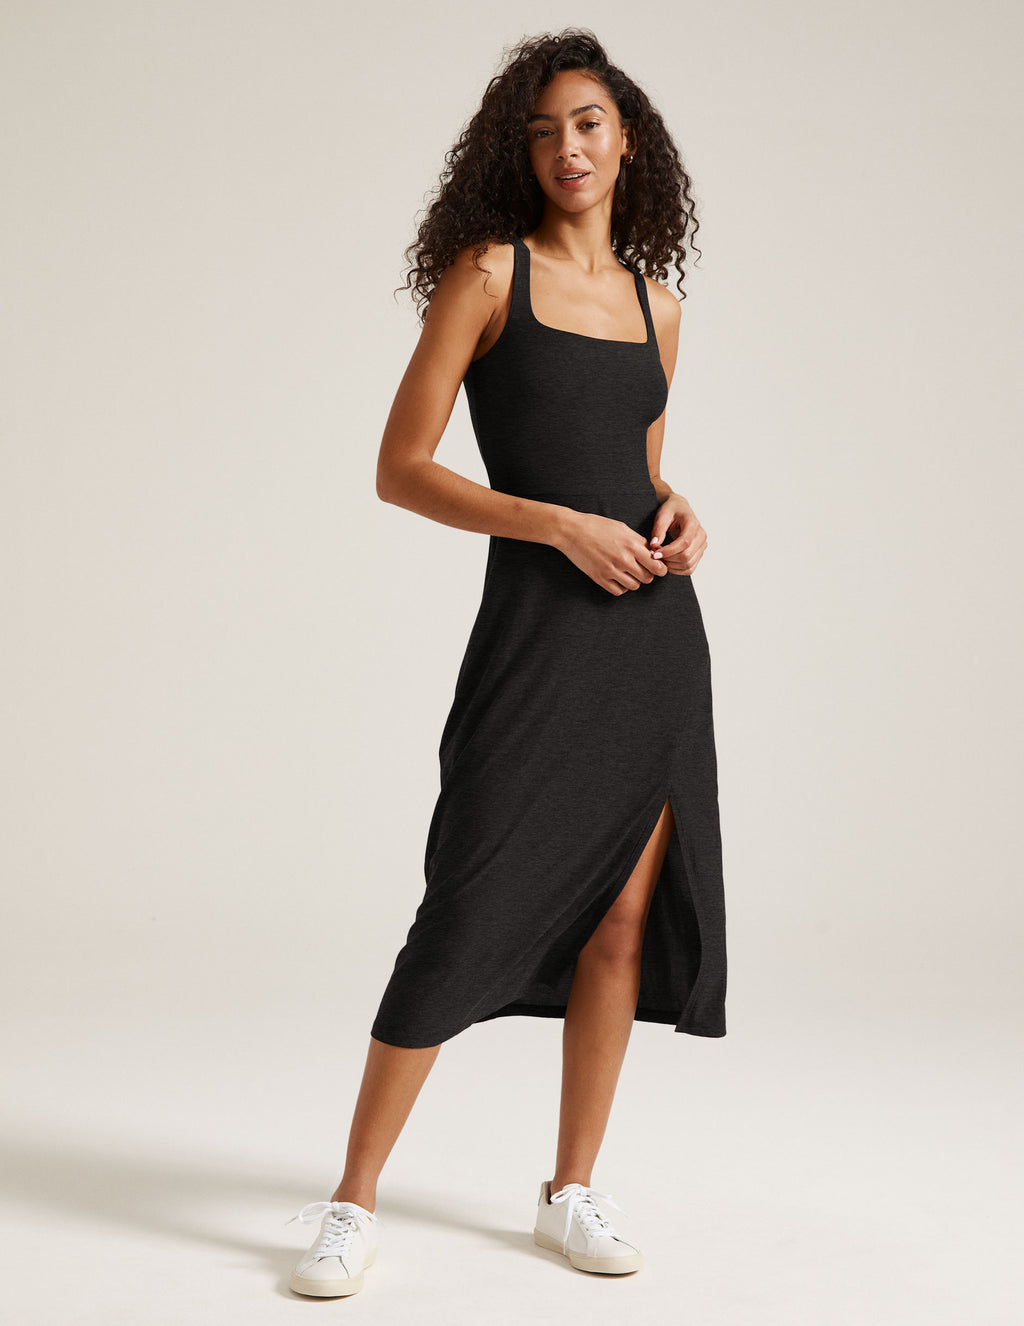 Featherweight Getaway Dress Featured Image